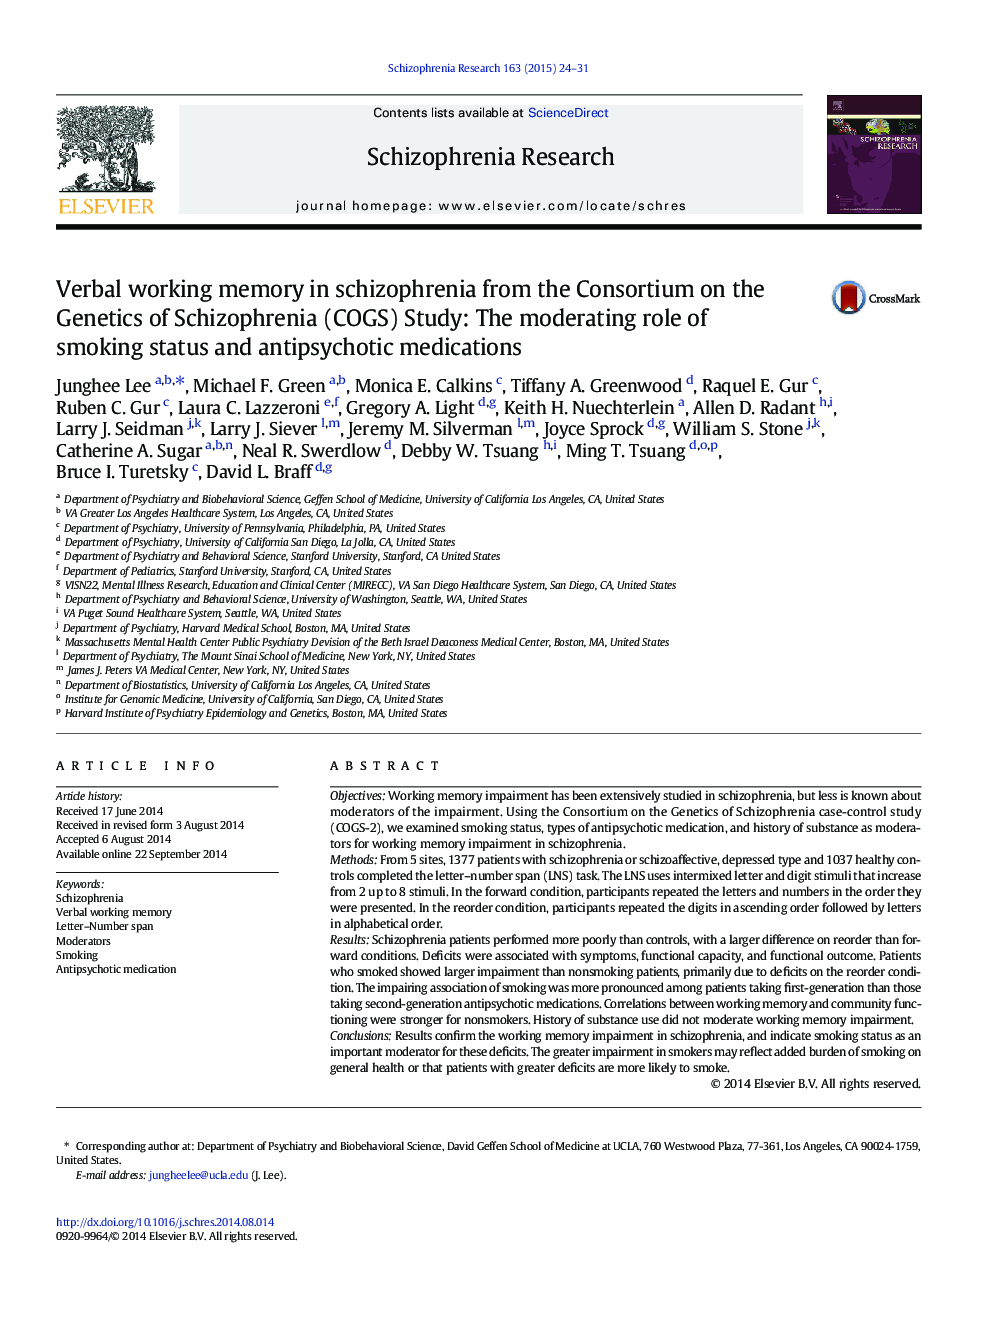 Verbal working memory in schizophrenia from the Consortium on the Genetics of Schizophrenia (COGS) Study: The moderating role of smoking status and antipsychotic medications